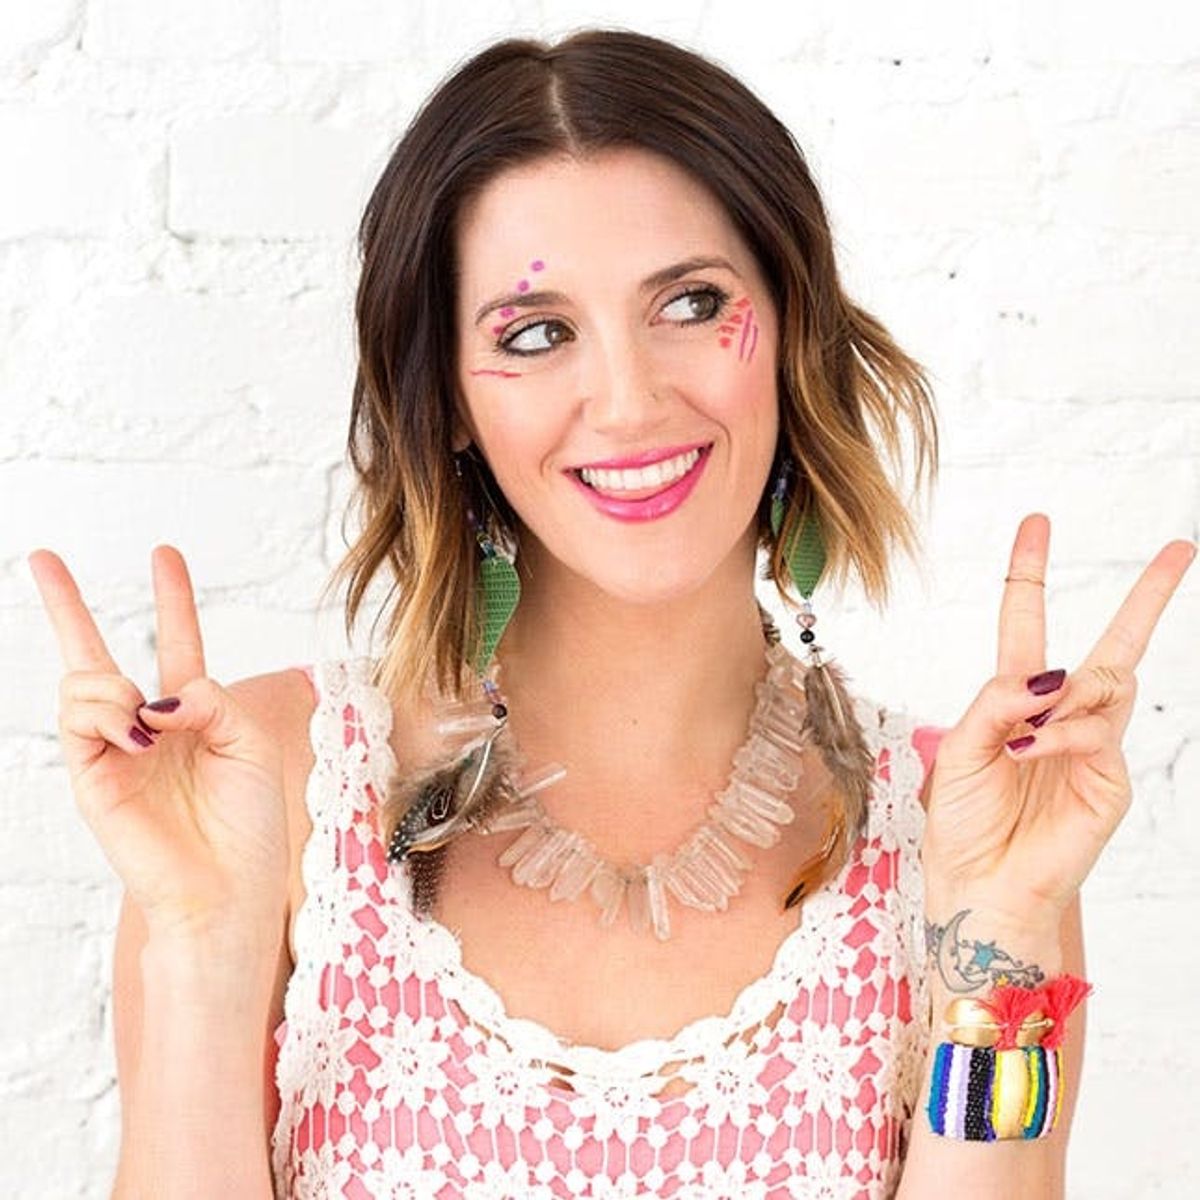 4 Easy Ways to DIY Festival Face Paint in Just 3 Steps